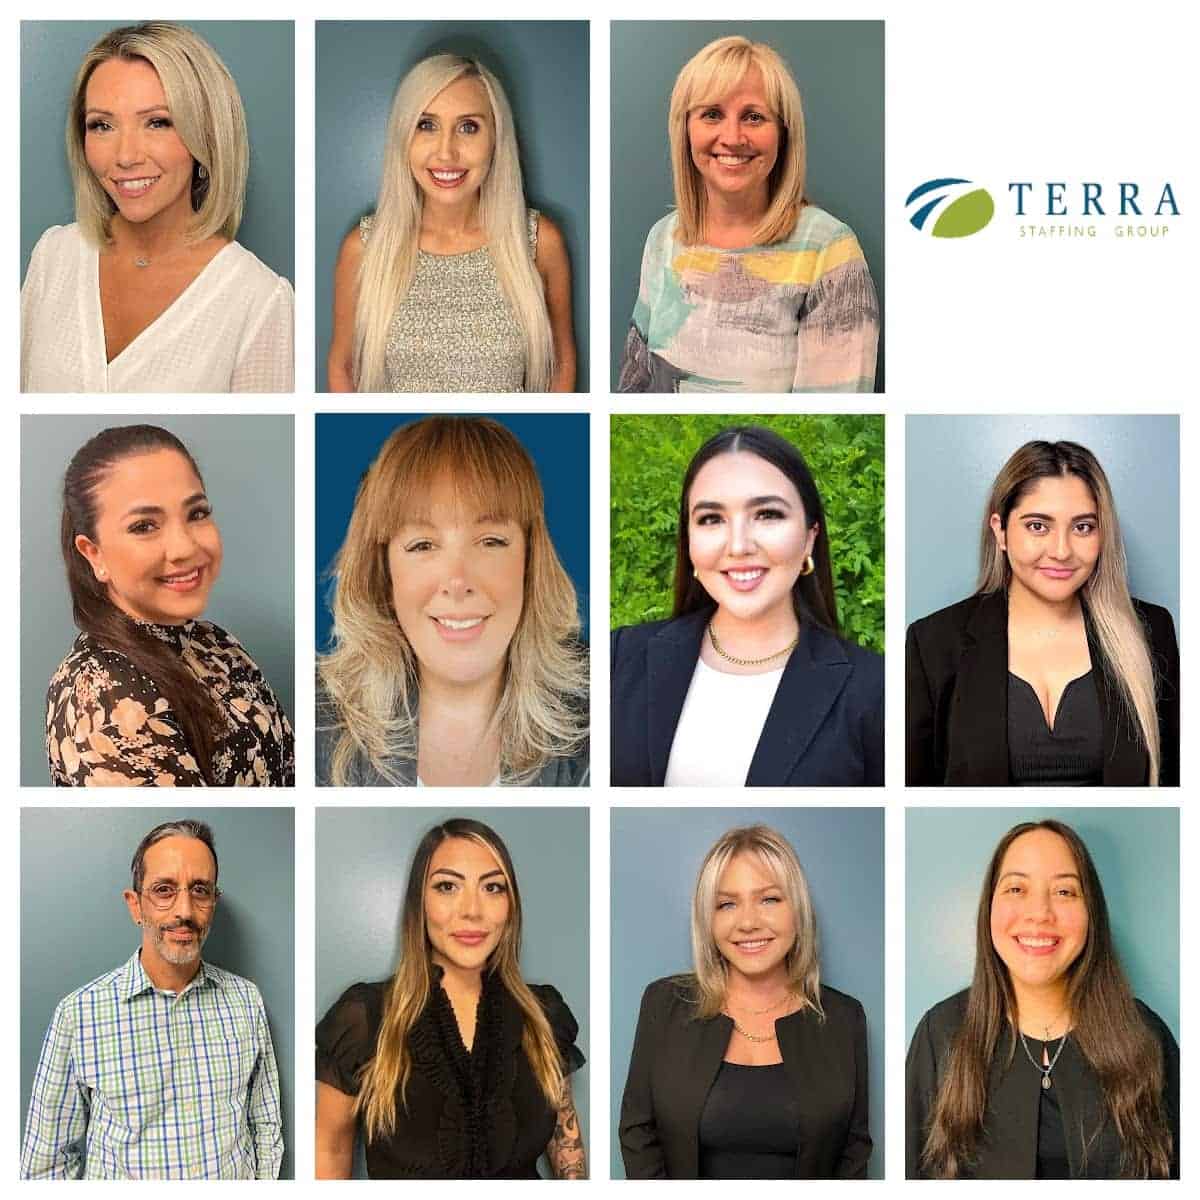 Collage of Terra Staffing Team In Scottsdale.